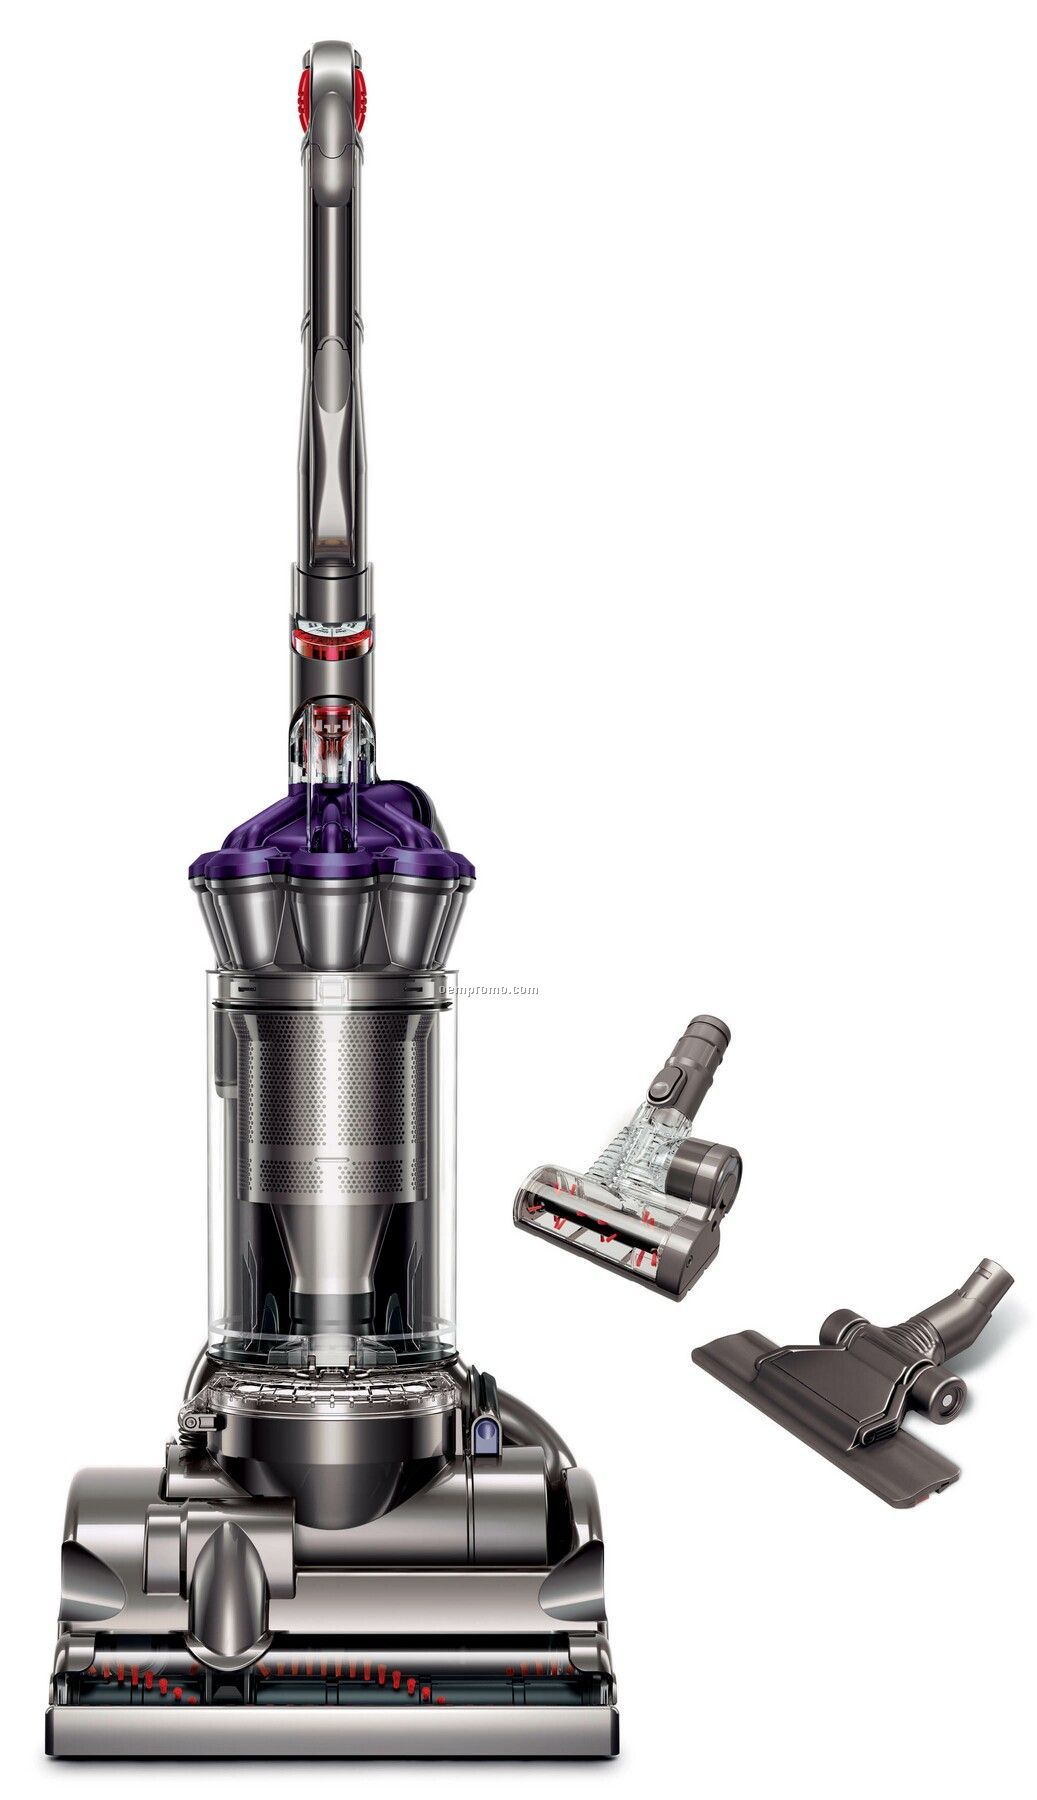 Dyson Dc28 Airmuscle Animal Upright Vacuum